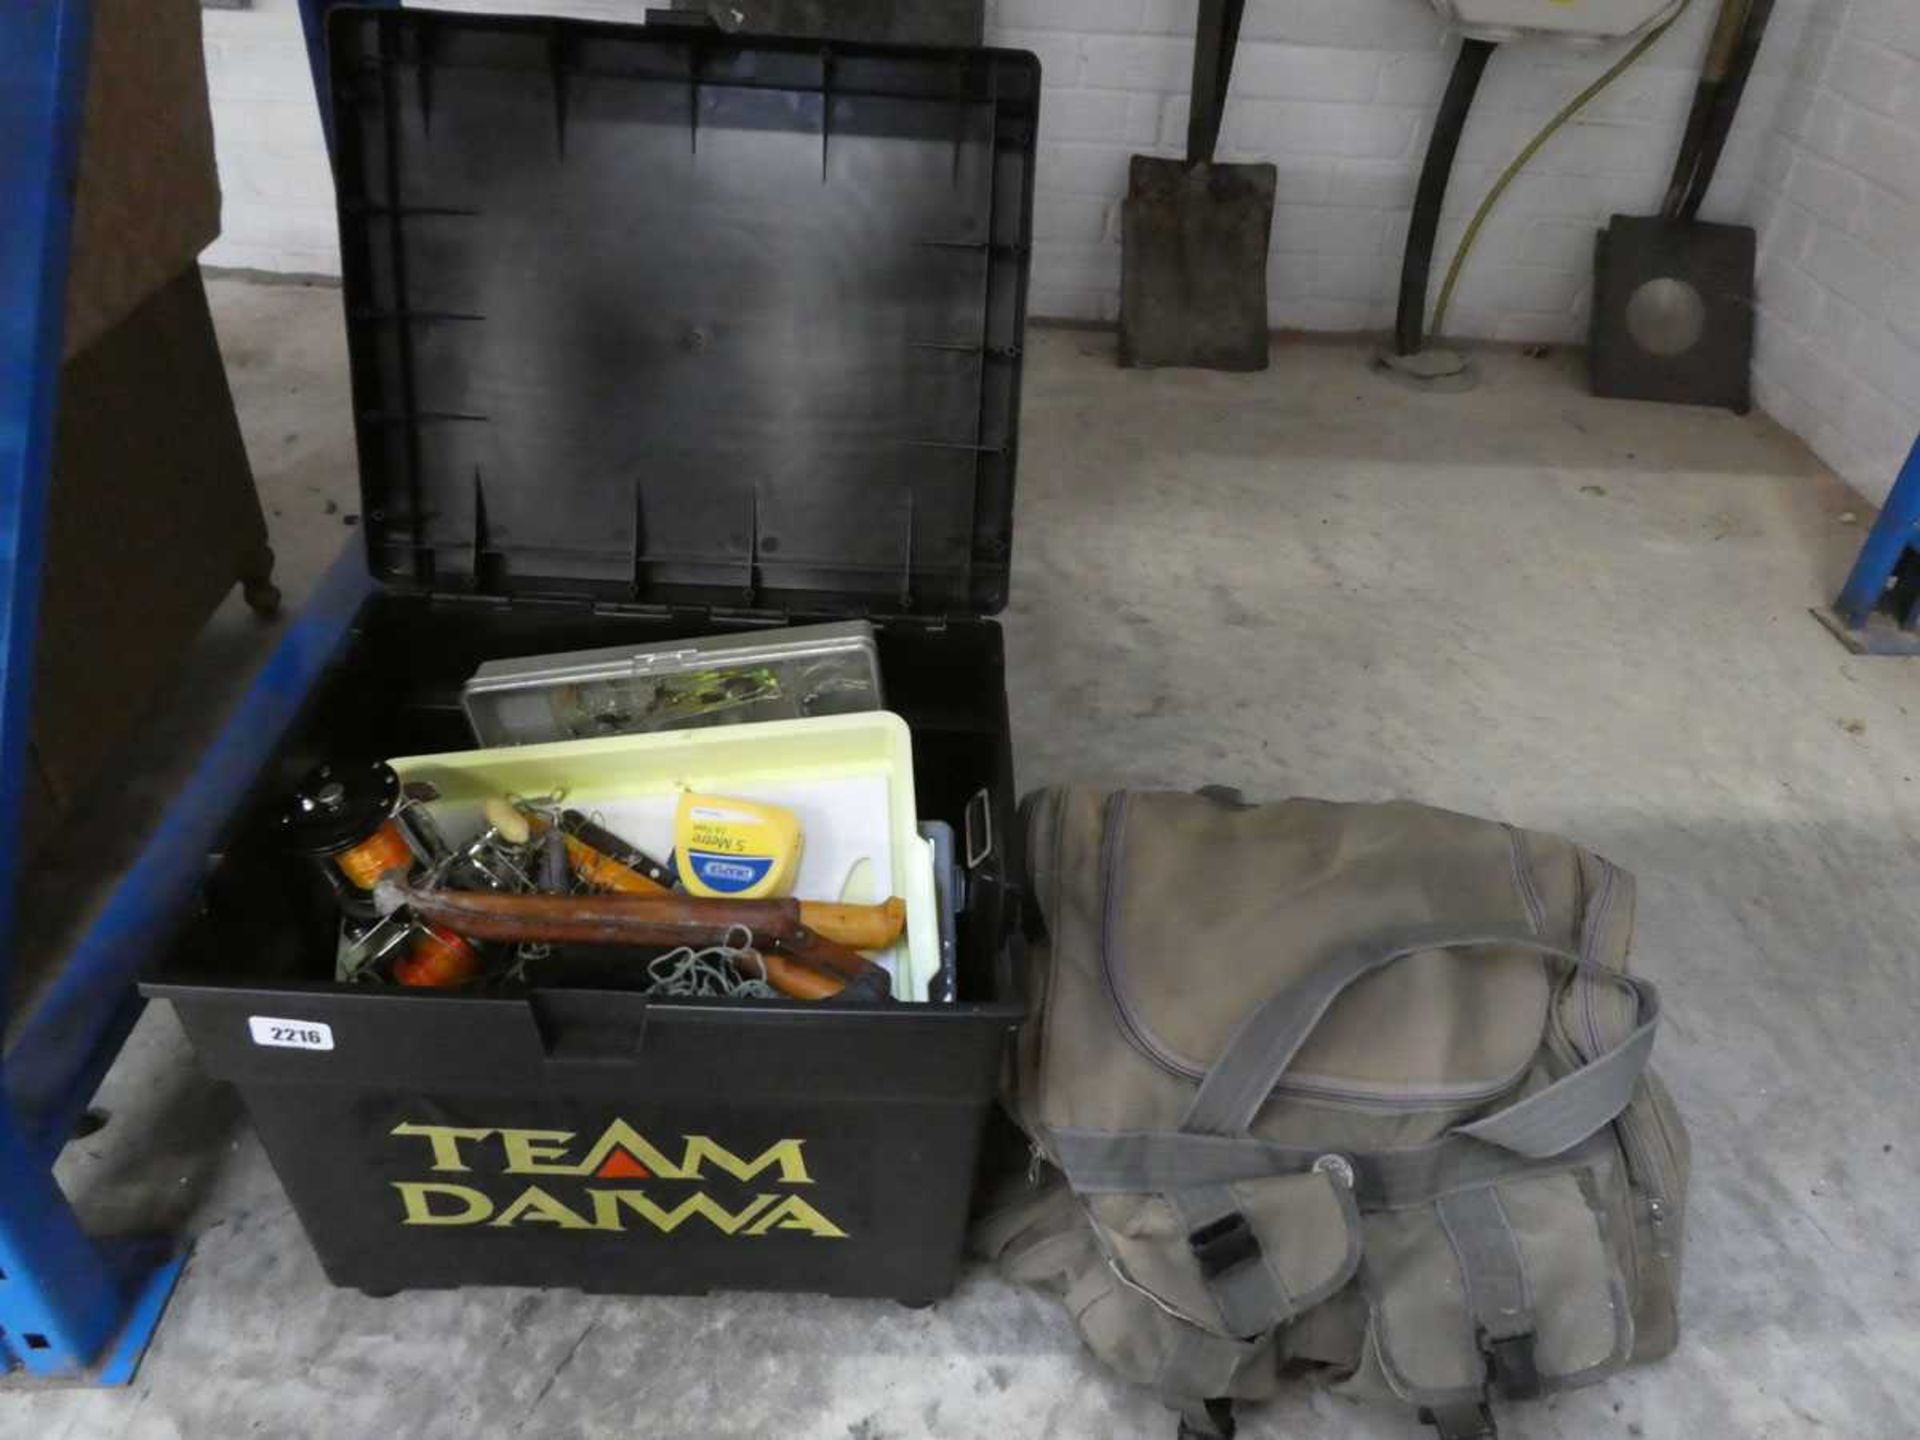 Team Daiwa fishing tackle box containing a quantity of mixed fishing tackle, together with a fishing